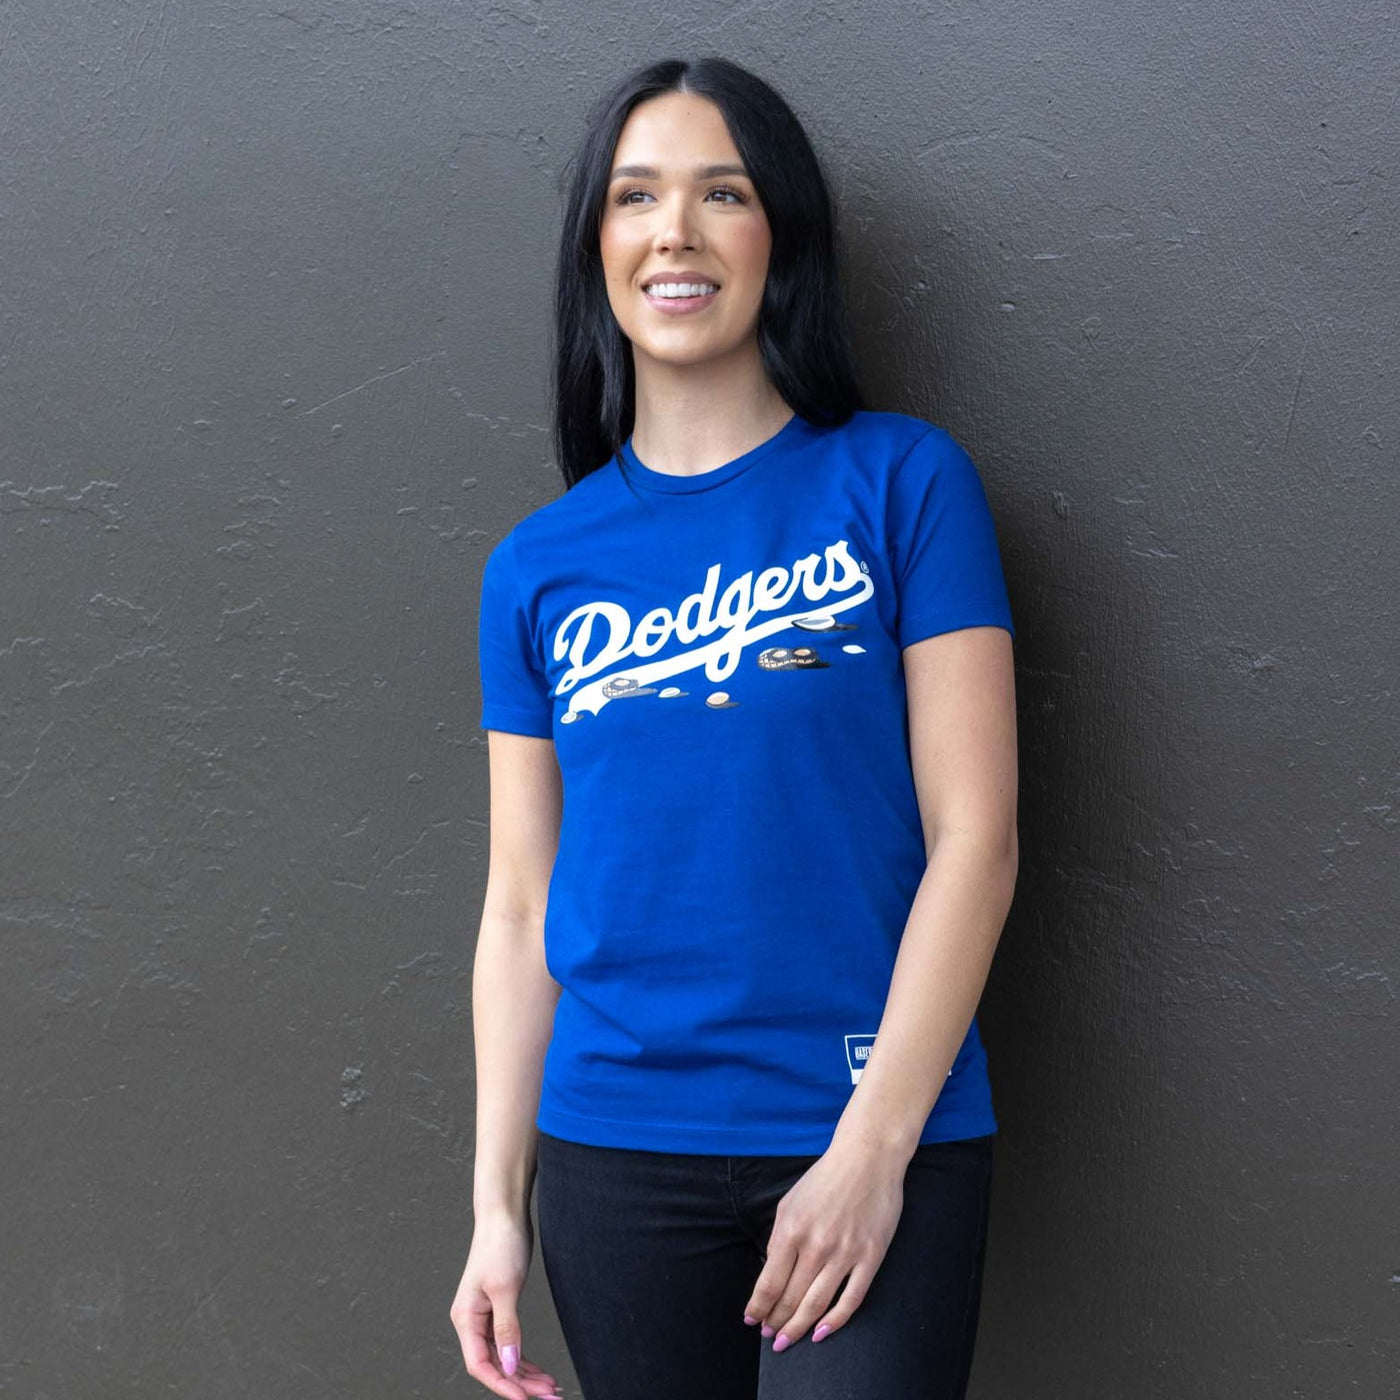 Get Your Peanuts! Women's Warm-Up Tee - Los Angeles Dodgers